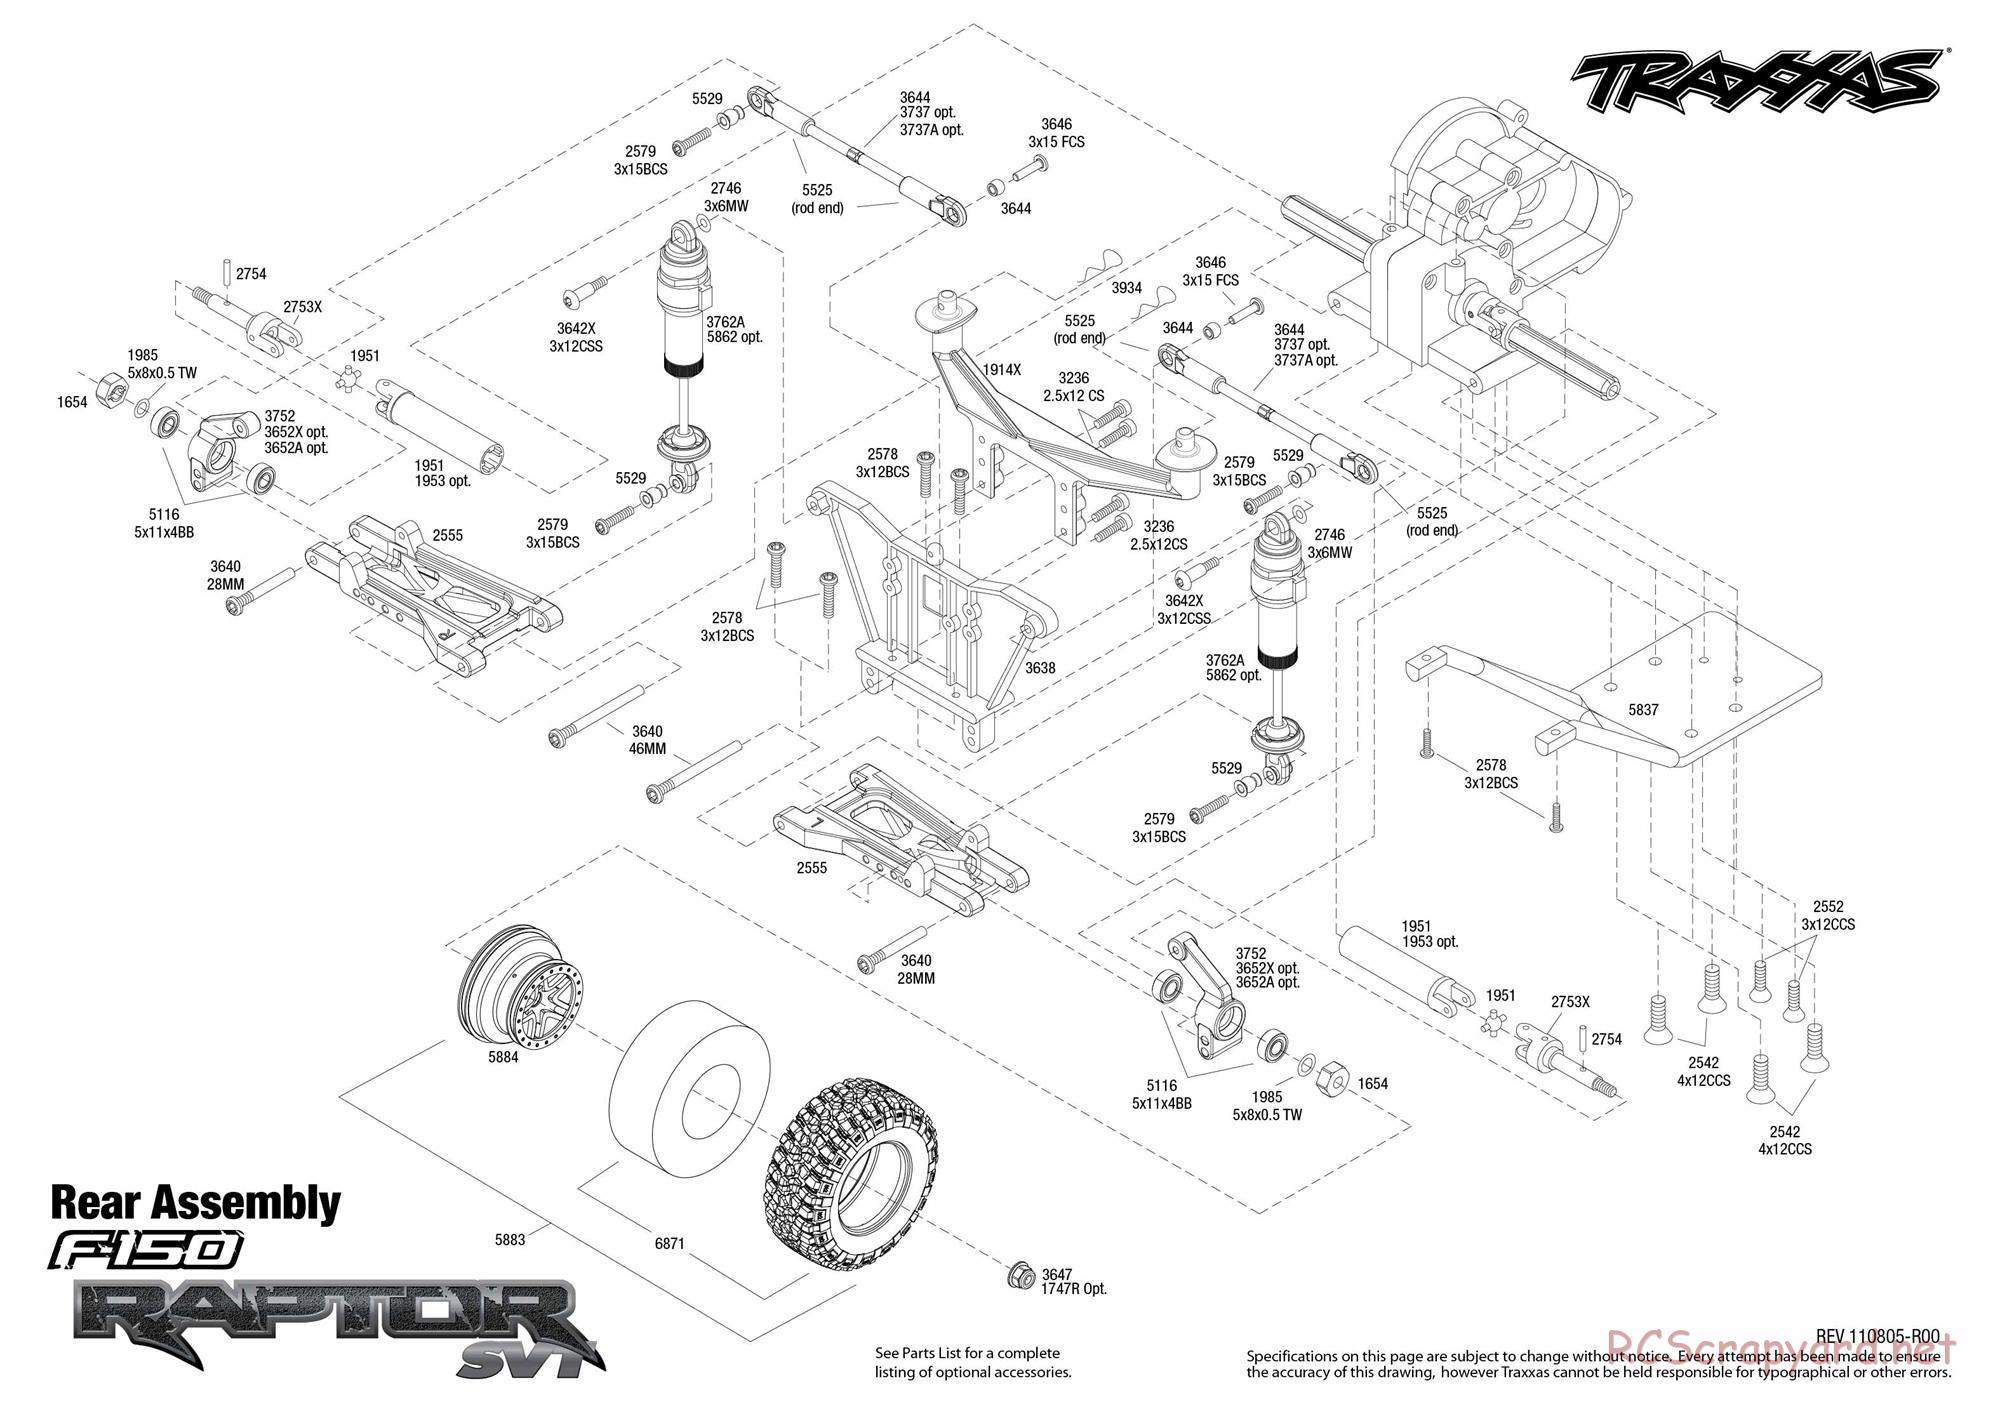 Traxxas - Ford F-150 SVT Raptor (2011) - Exploded Views - Page 3